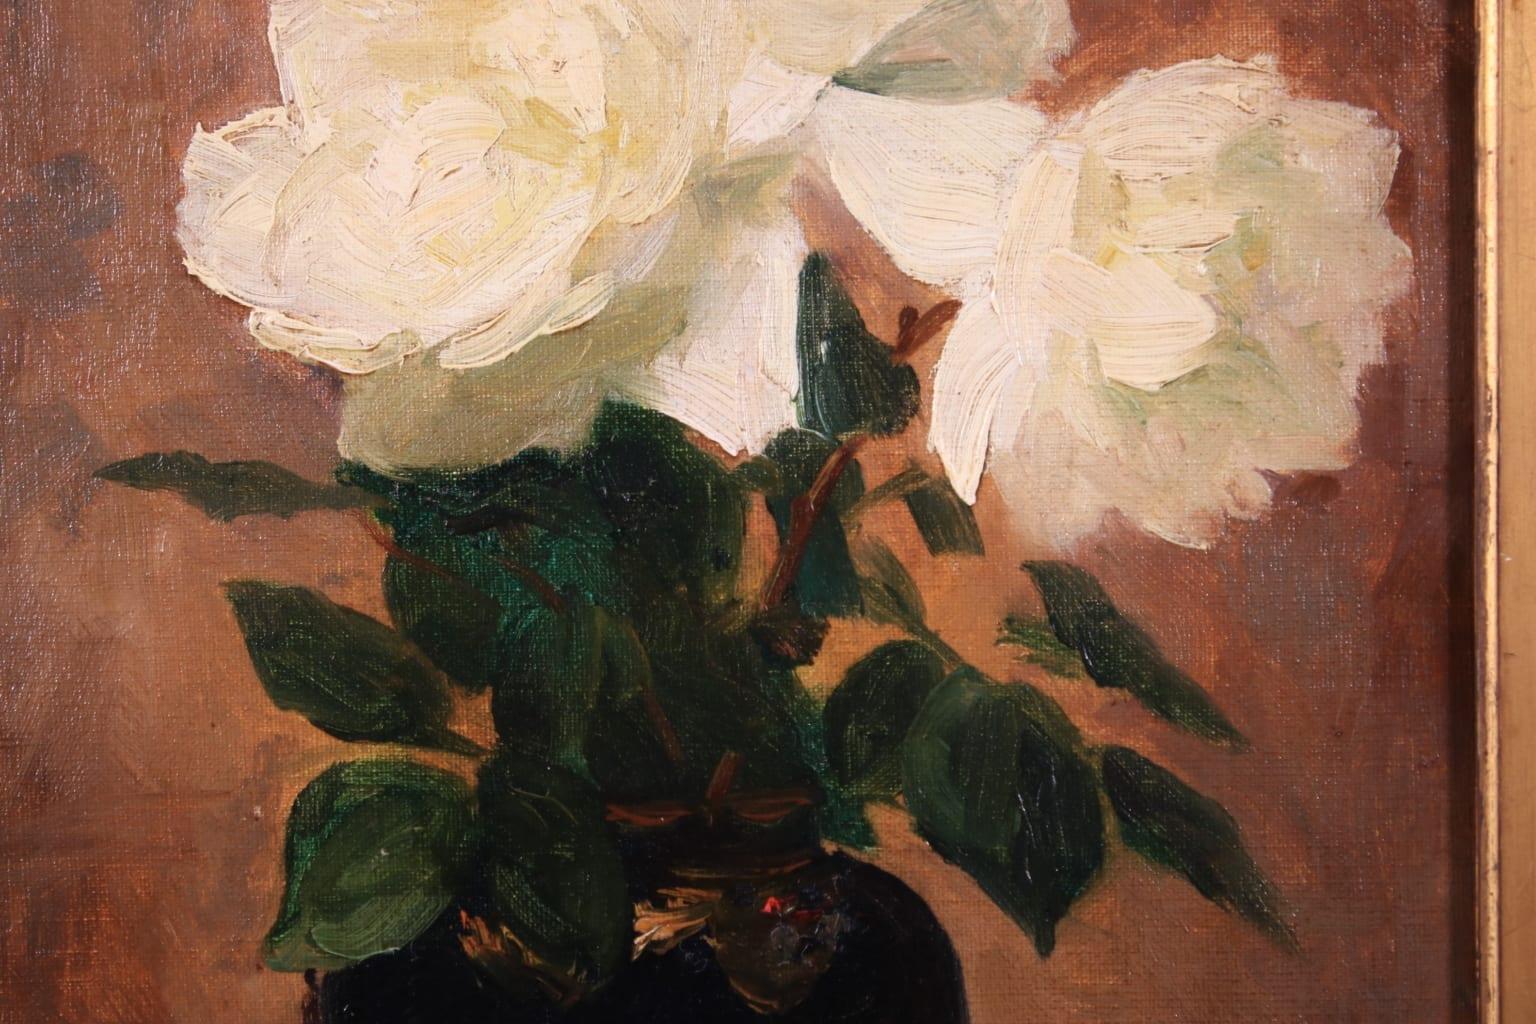 Roses Blanches - Impressionist Oil, Still Life White Flowers, Circle of E Manet - Brown Interior Painting by Edouard Manet